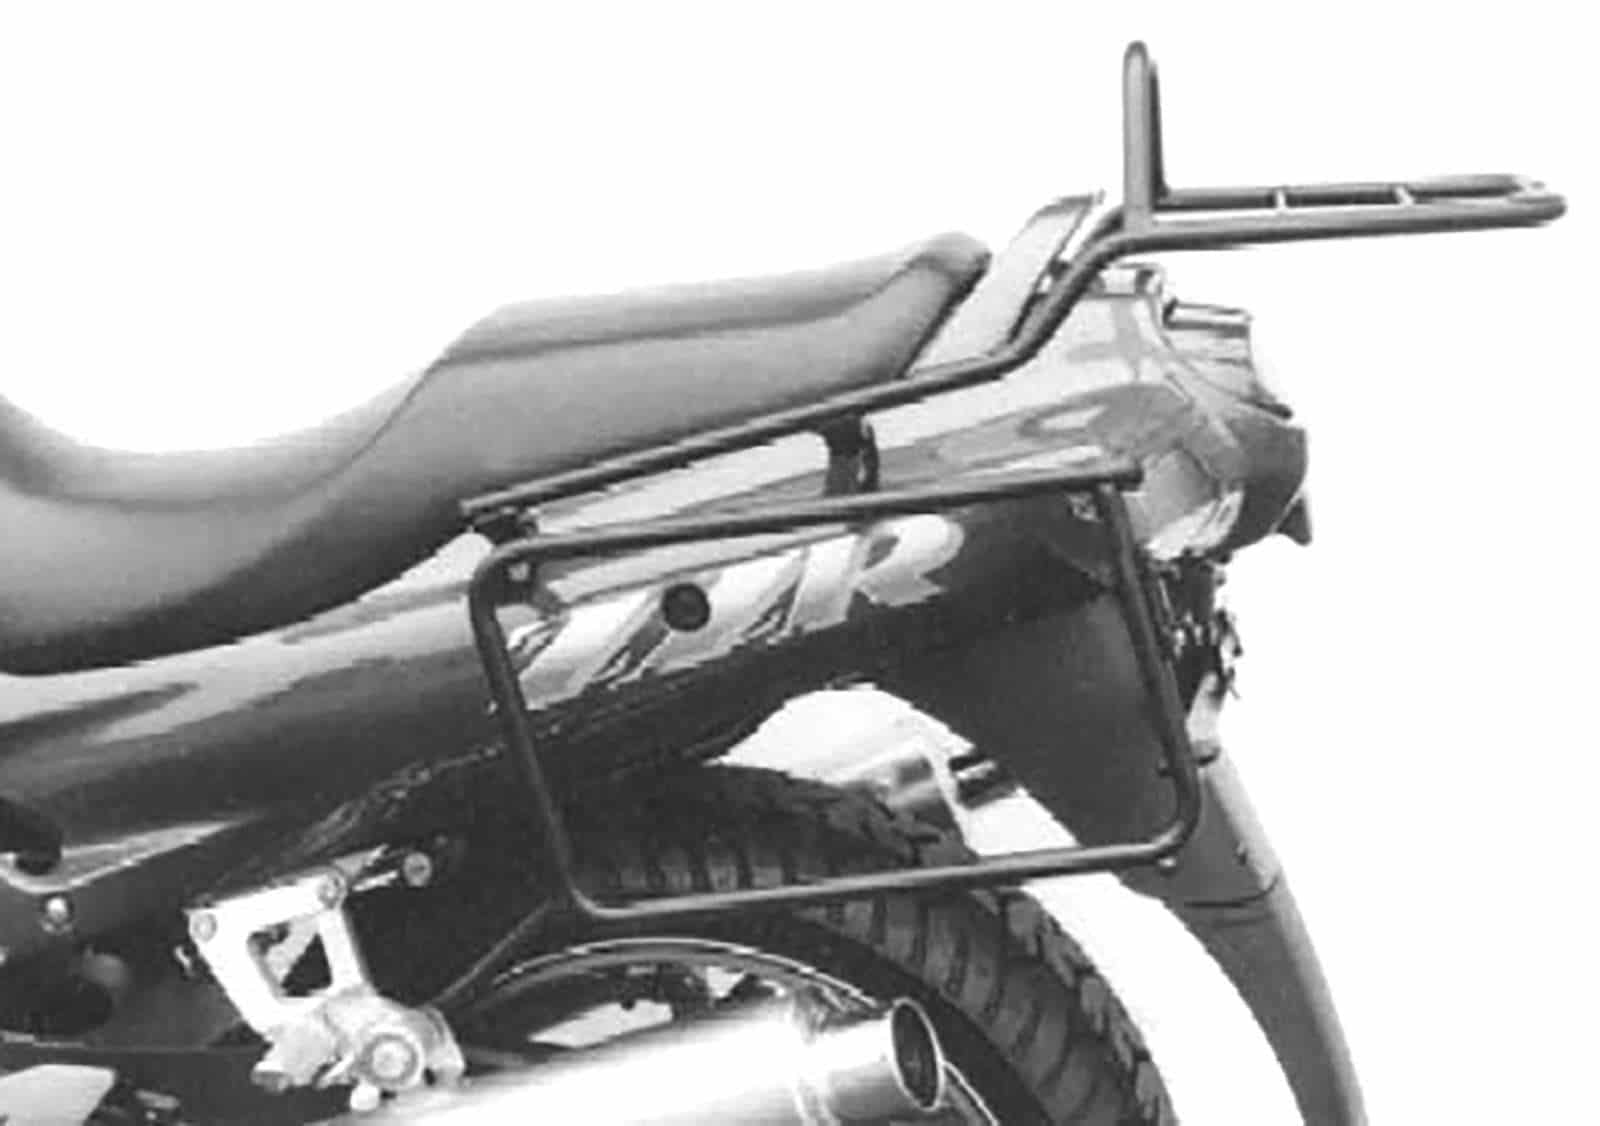 Sidecarrier permanent mounted black for Kawasaki ZZ-R 600 (1993-2005)